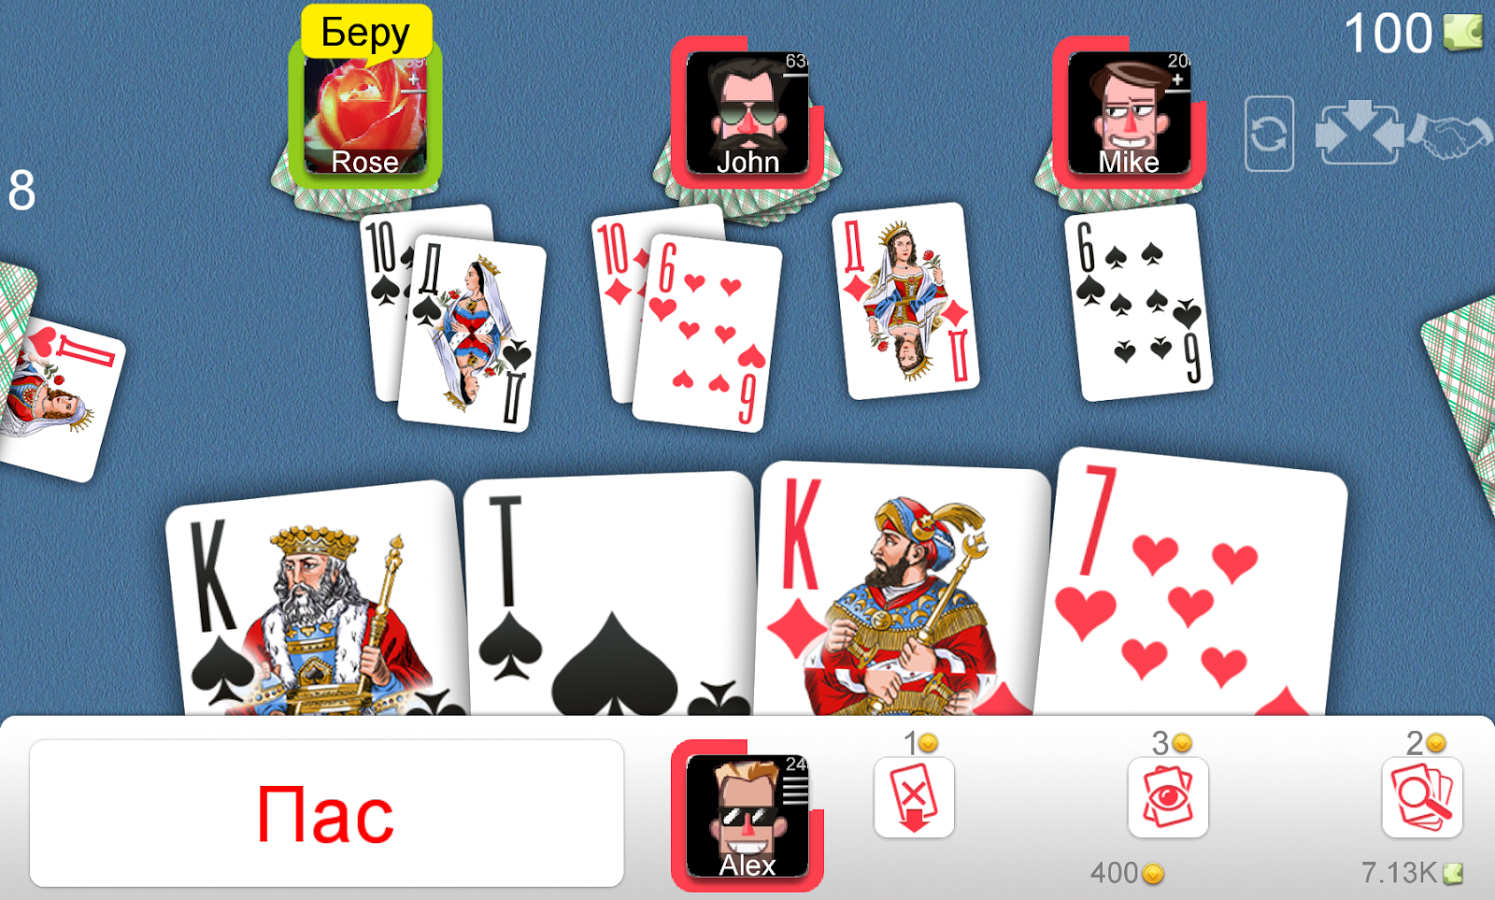 Durak: Fun Card Game for android instal